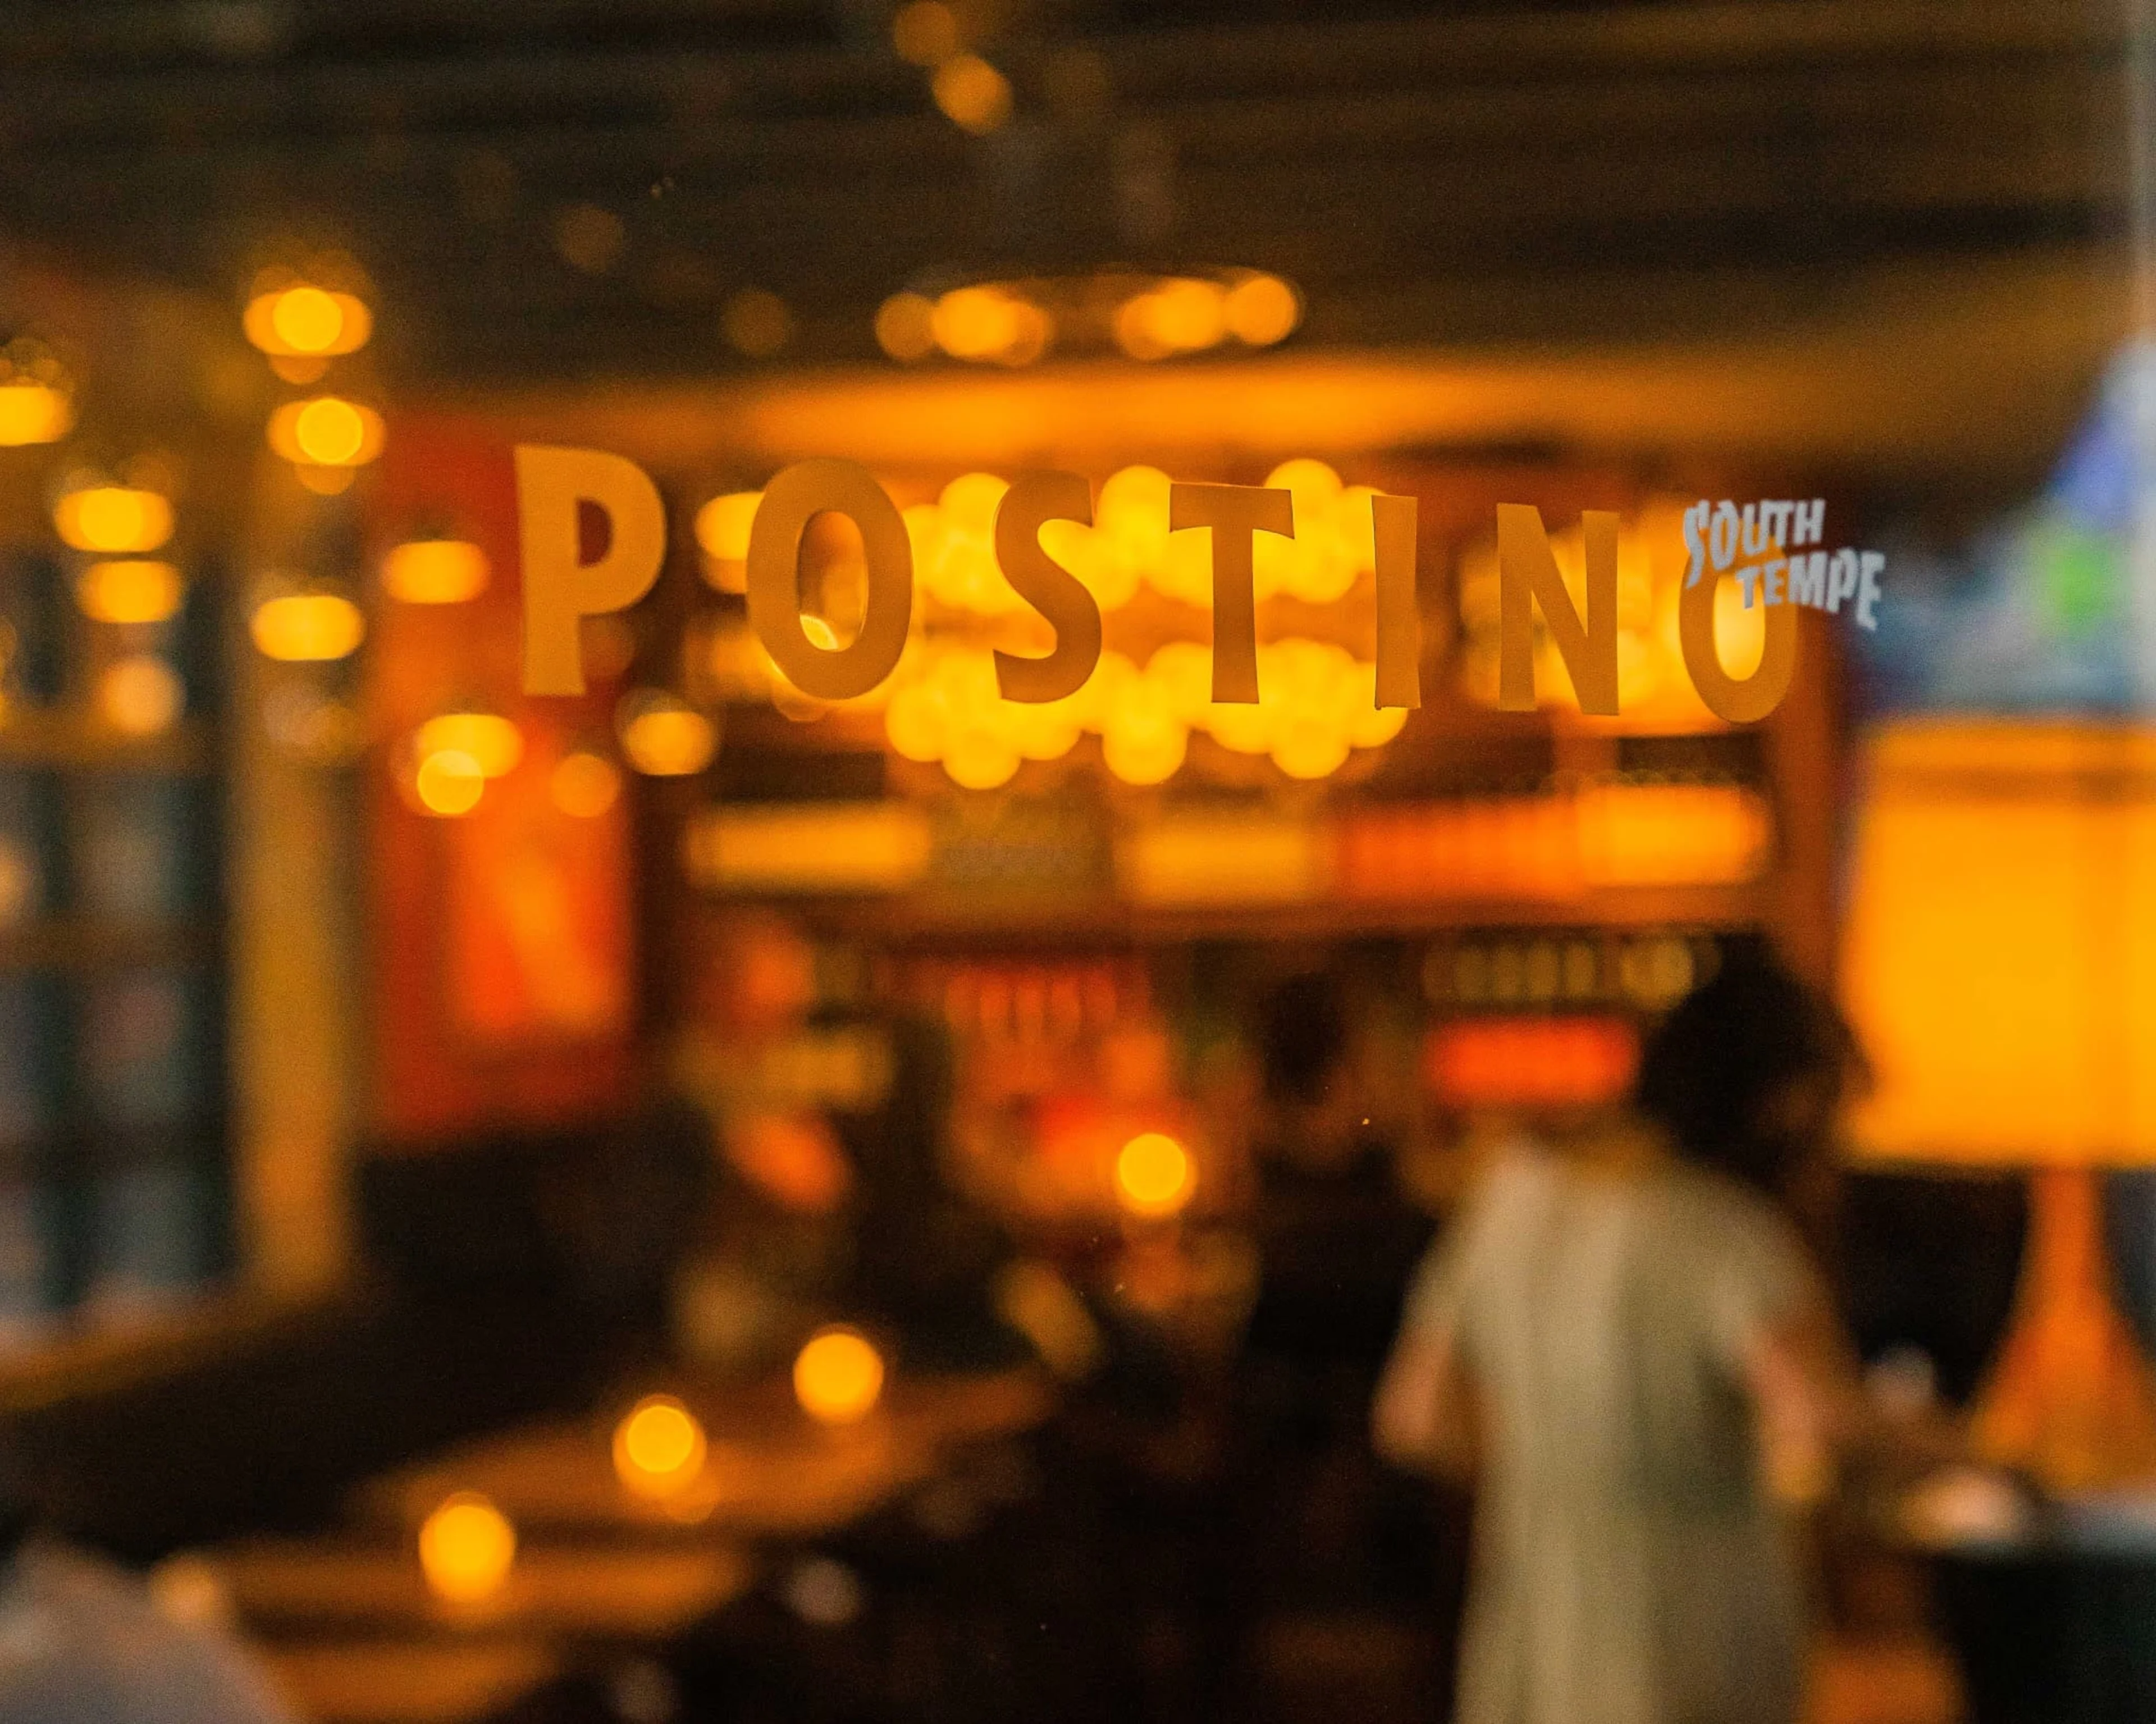 A glass window with Postino South Tempe logo on it